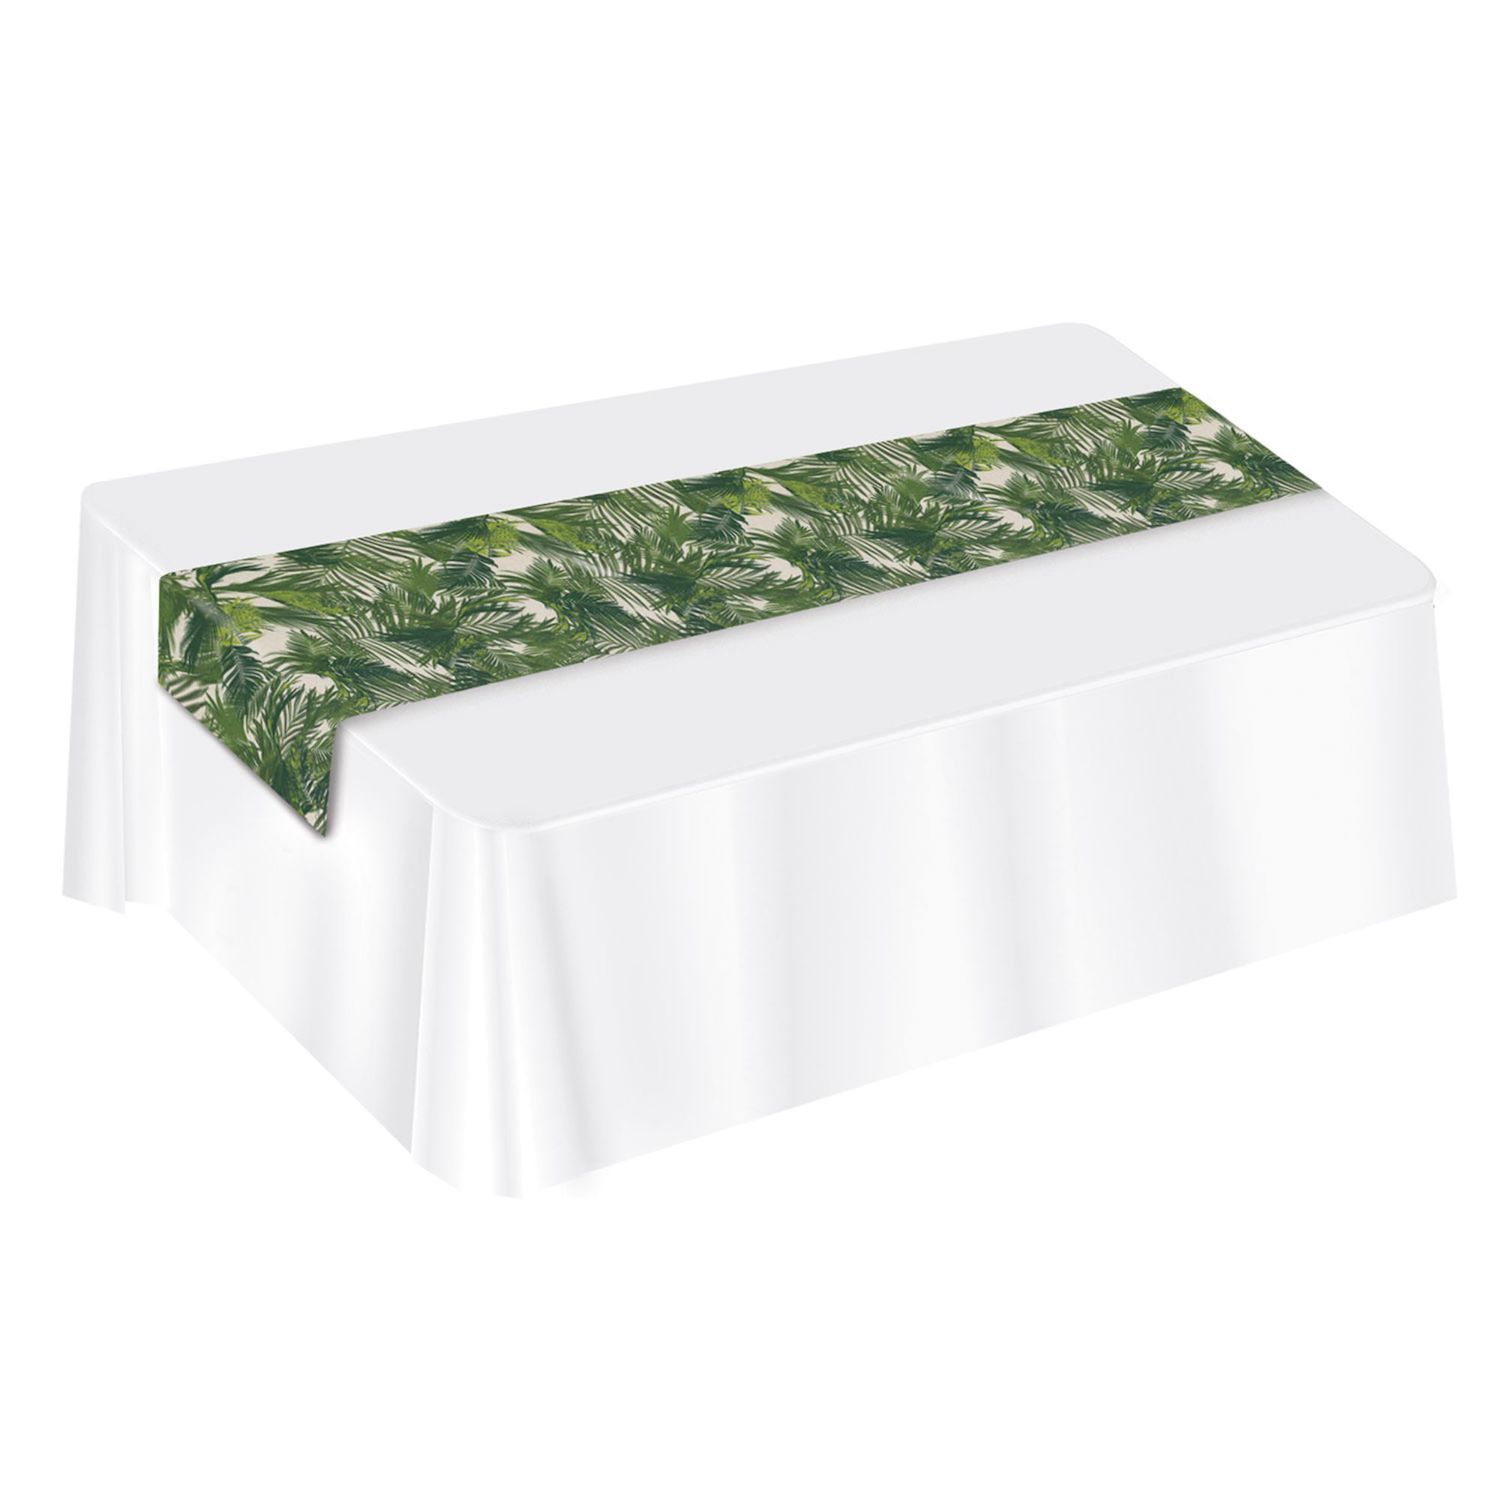 Juvale 6 Foot Synthetic Grass Table Runner for Party Decor (14 x 72 Inches)  